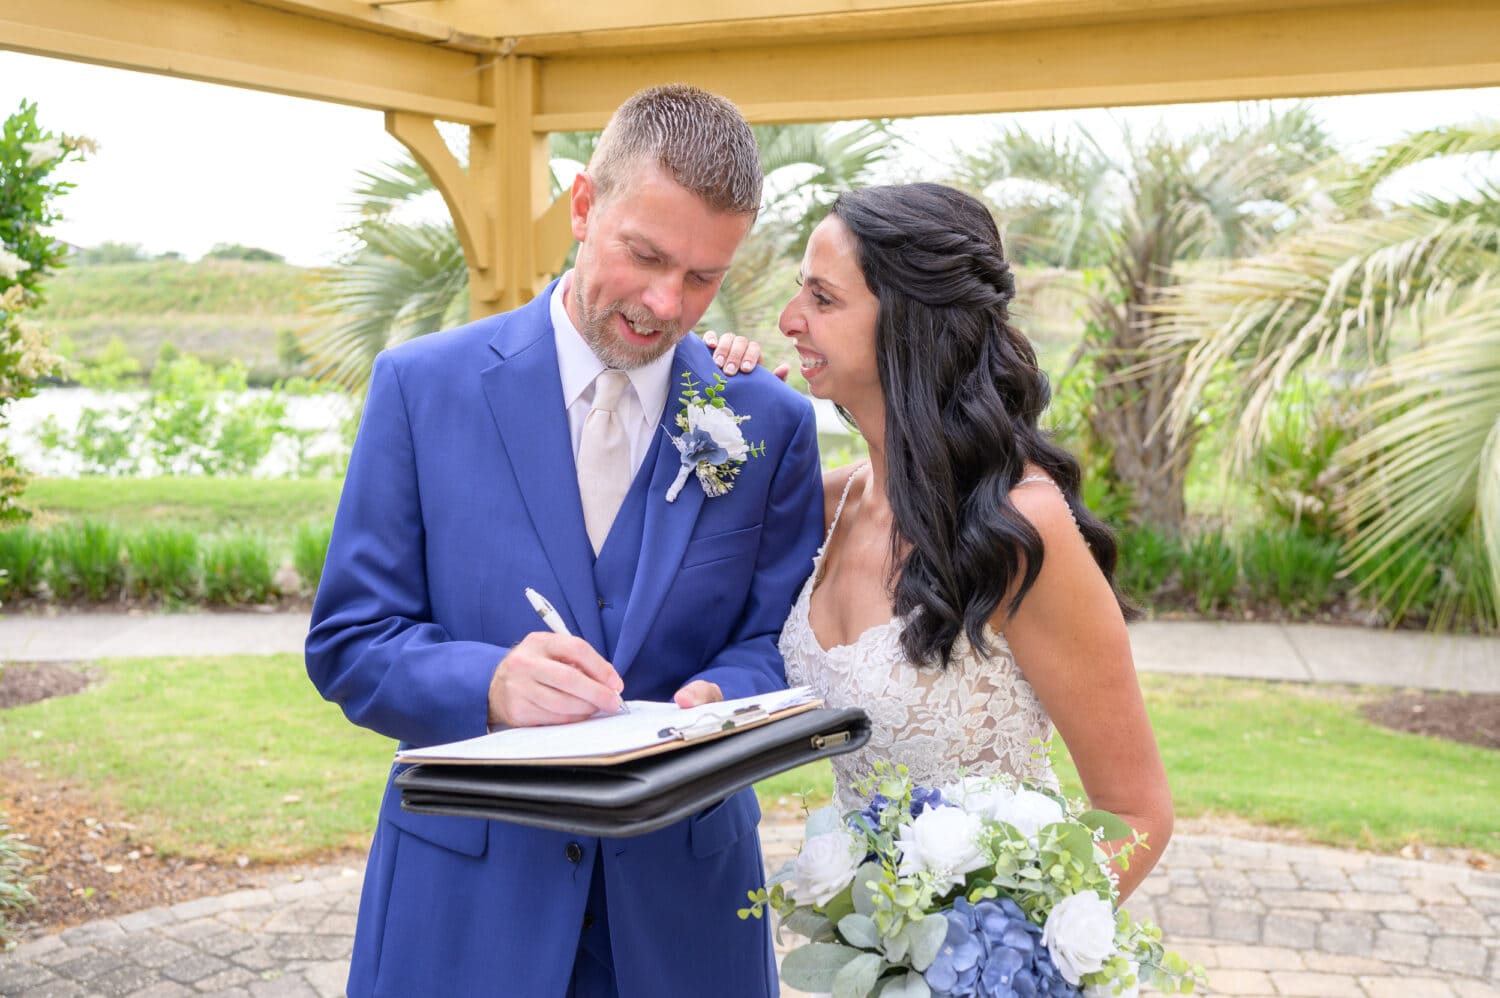 Signing the marriage license - The Marina Inn